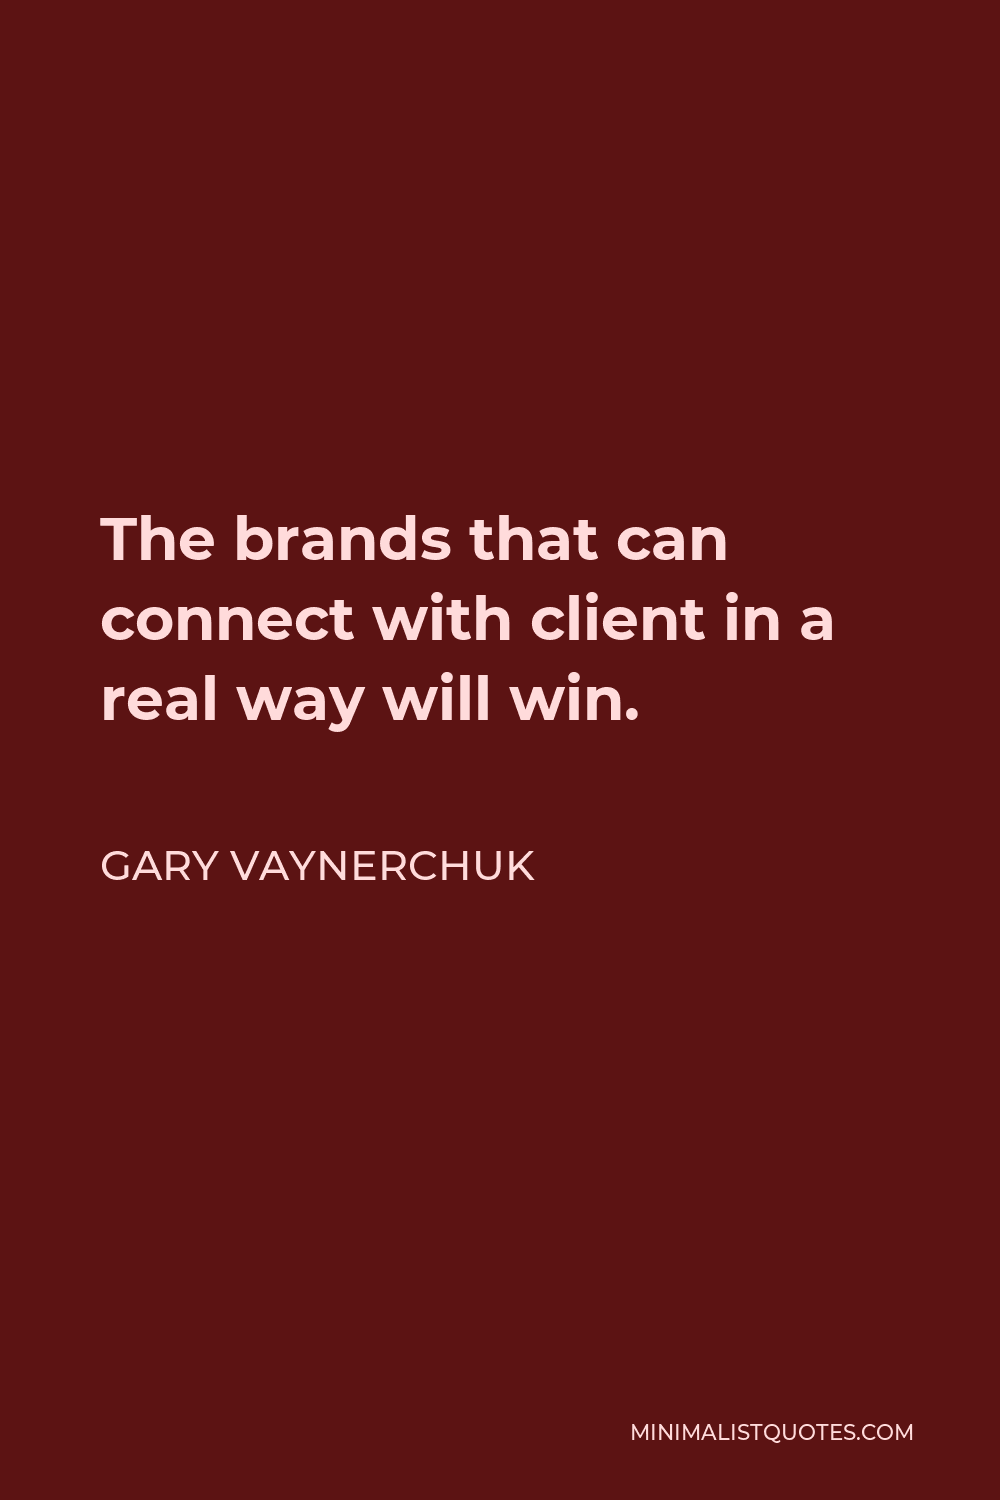 Gary Vaynerchuk Quote - The brands that can connect with client in a real way will win.